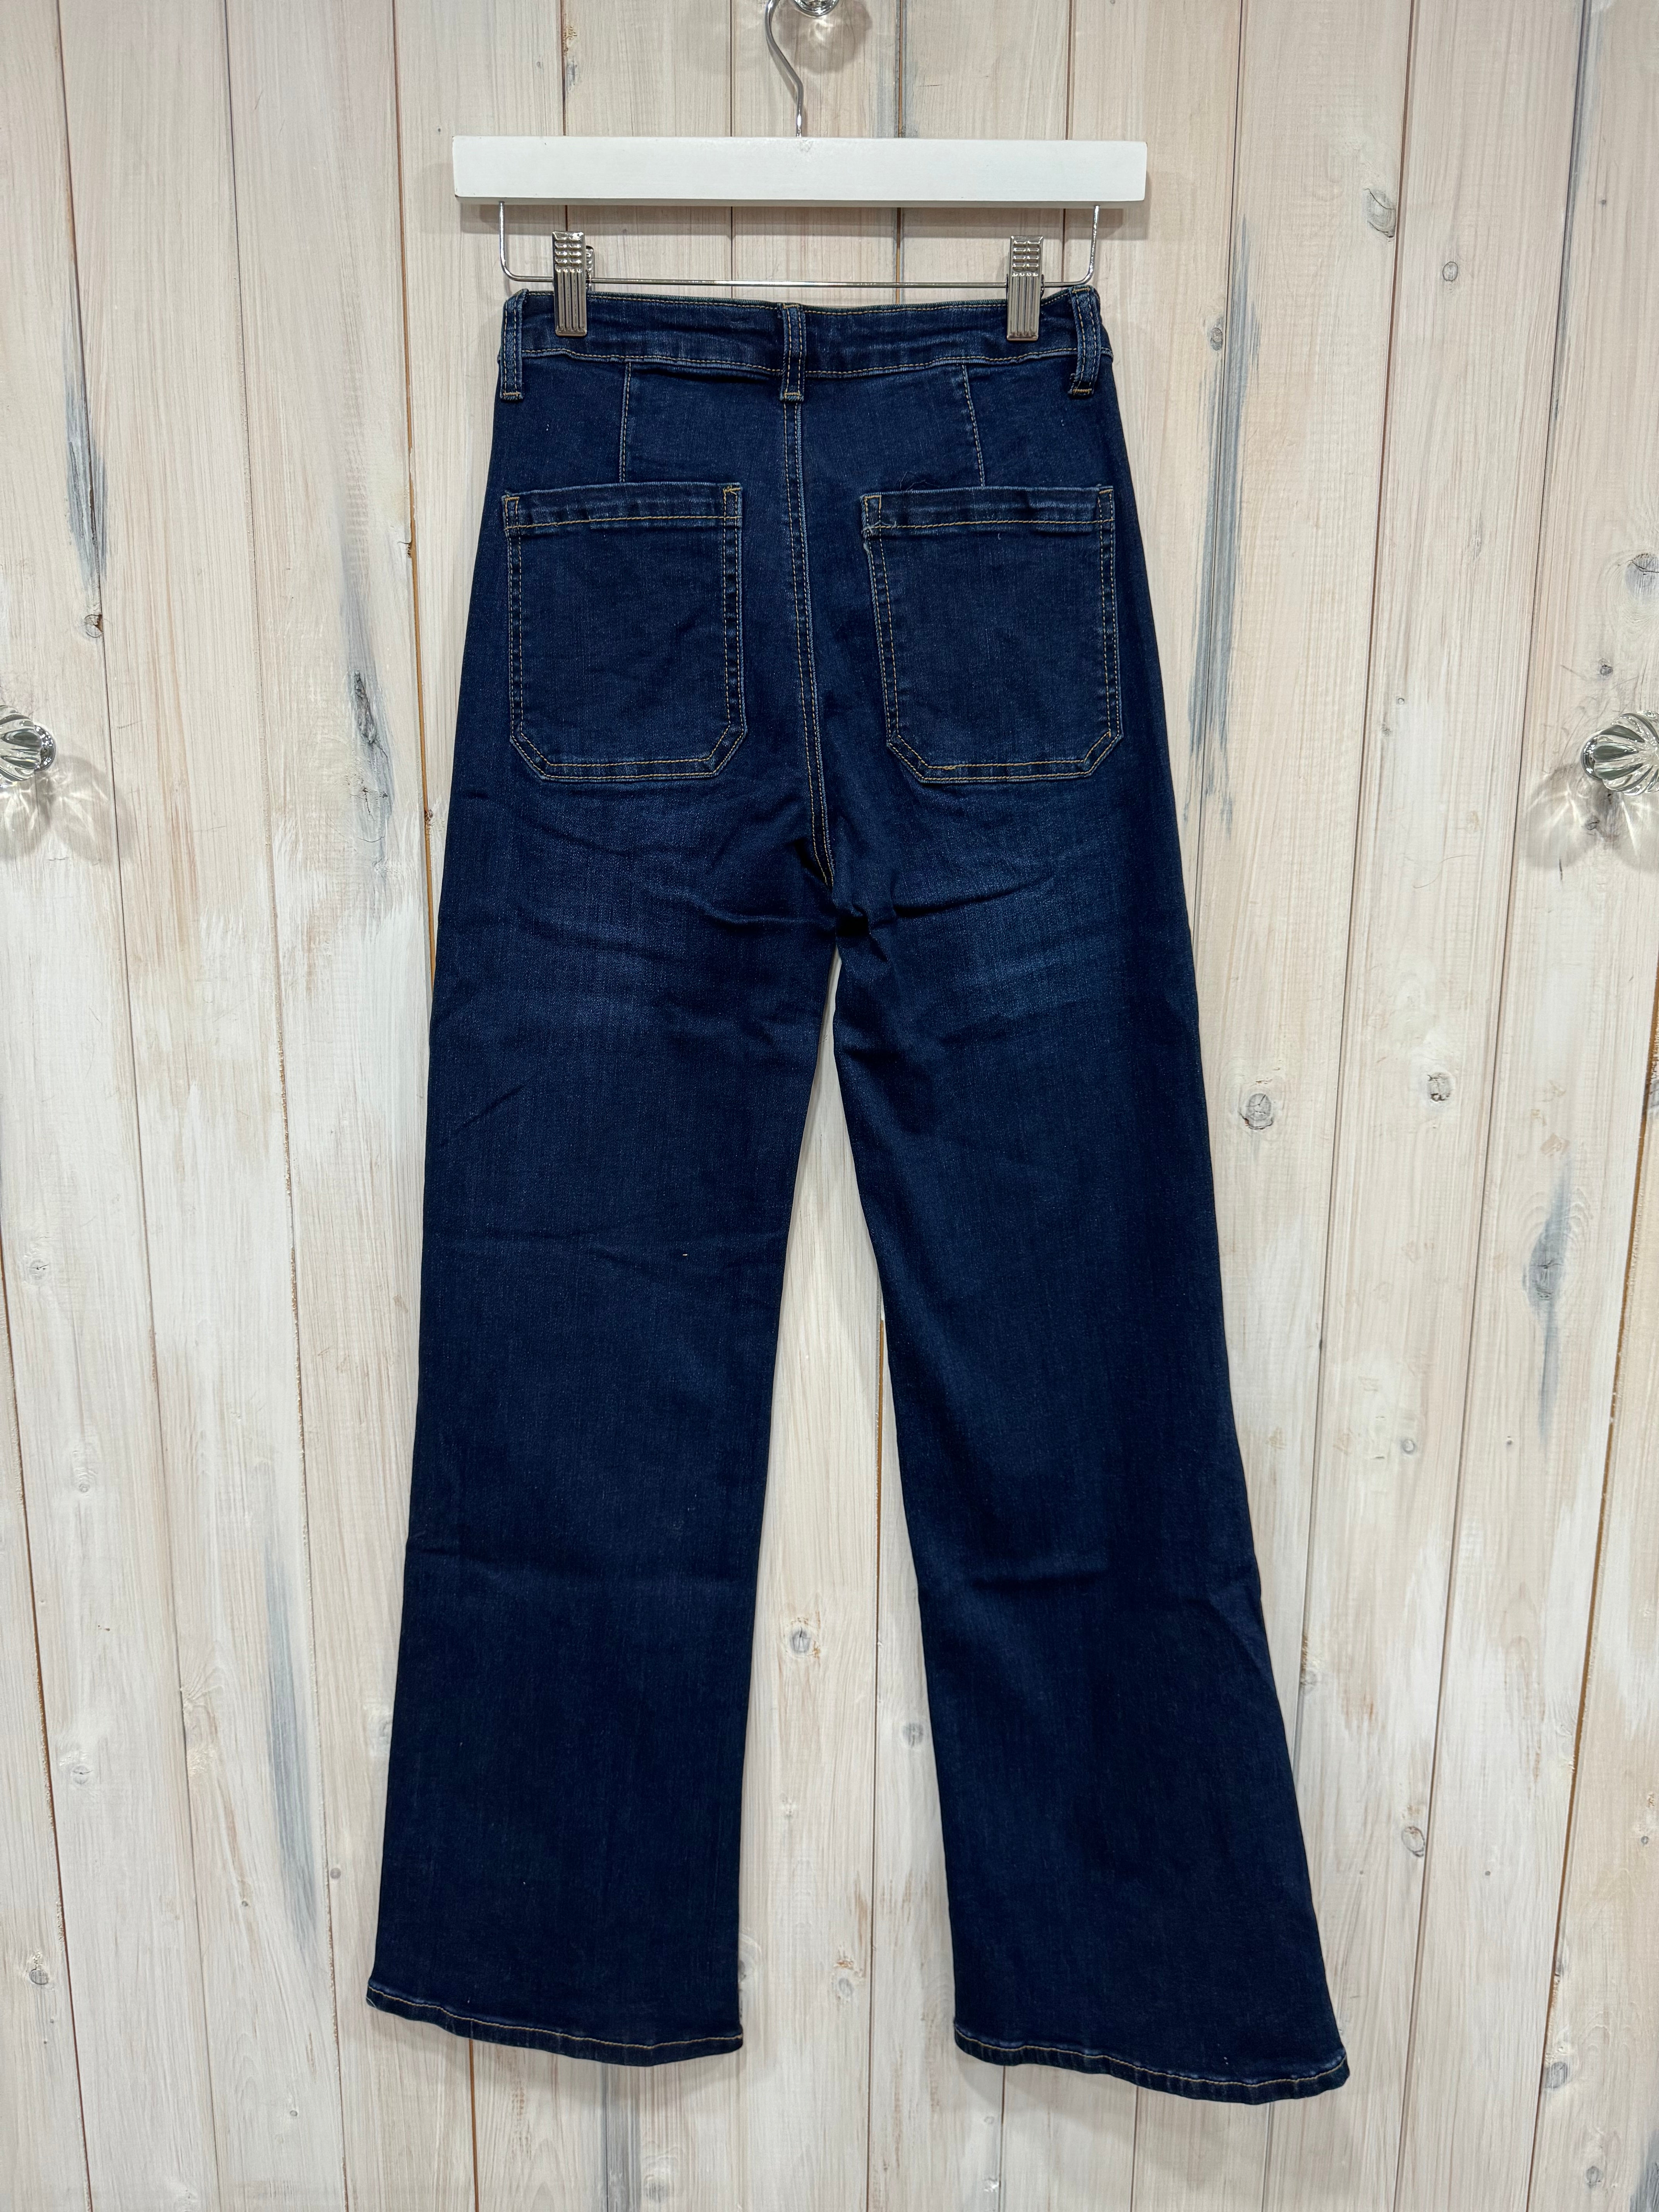 Wyley Scallop Pocket Jeans - New Free From Humanity